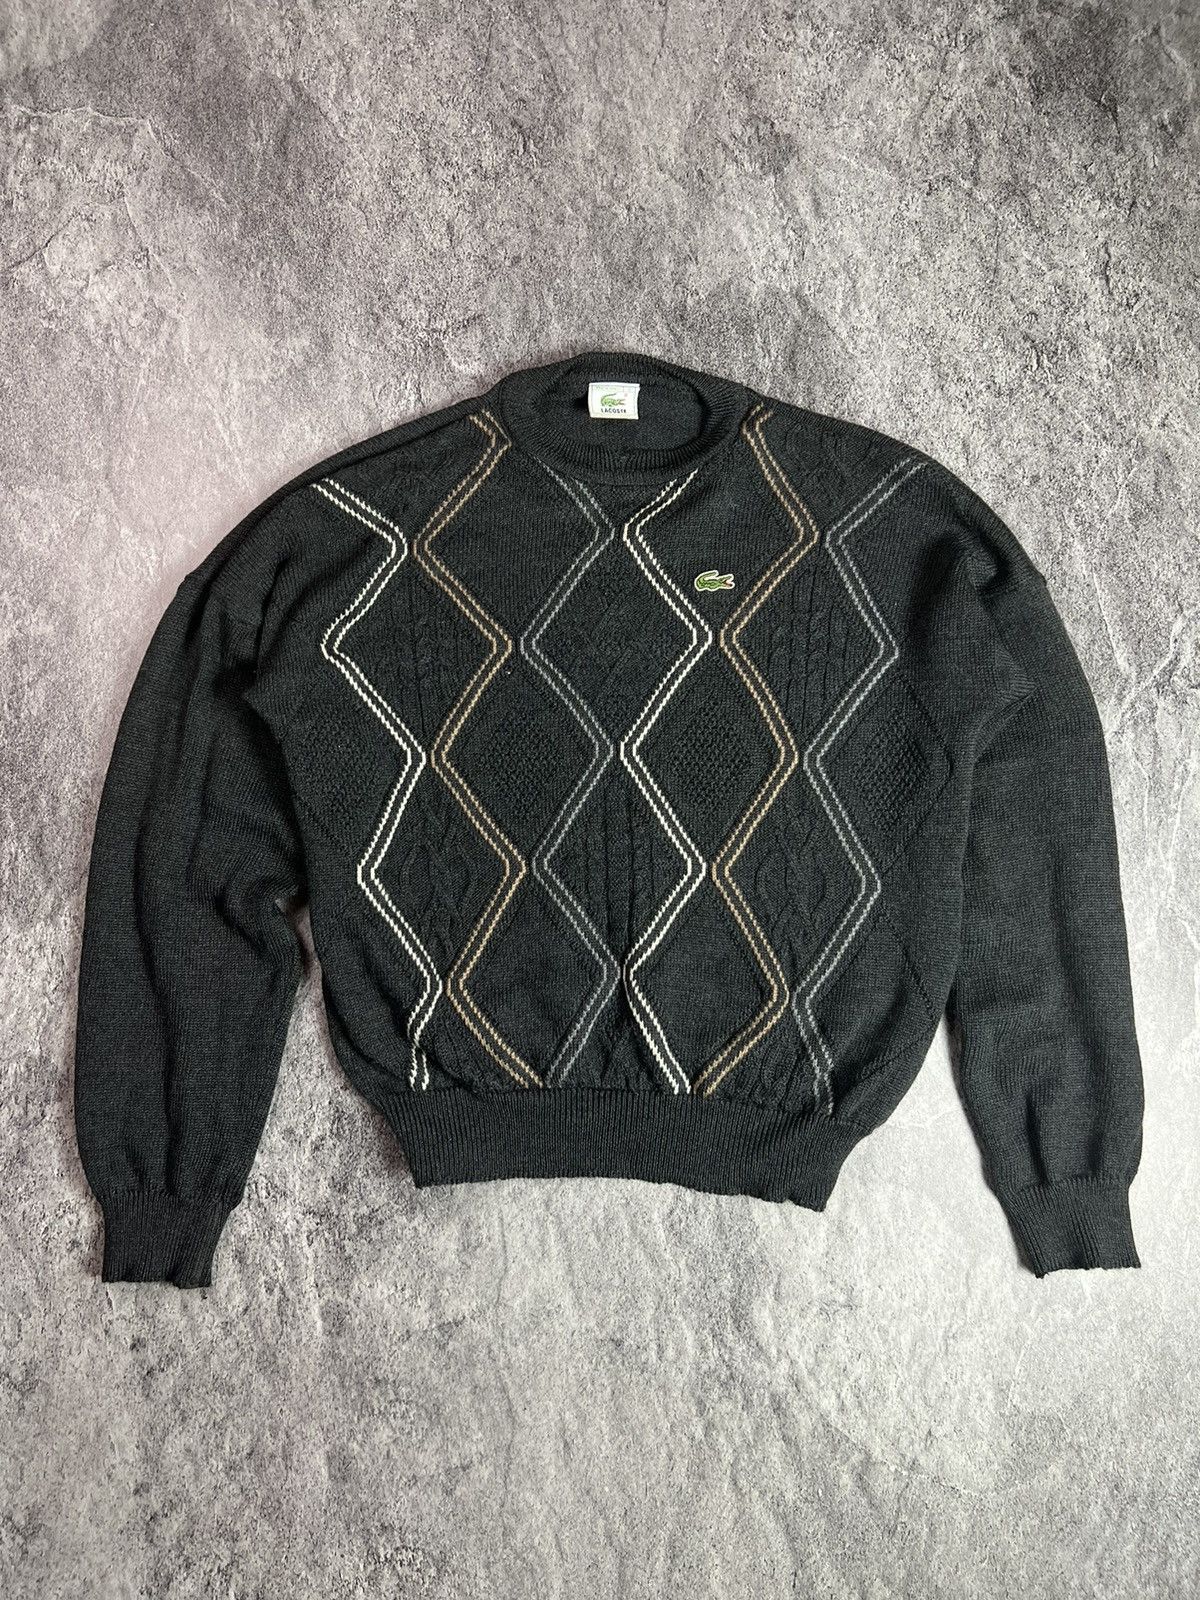 Pre-owned Lacoste X Vintage 90's Lacoste Vintage Striped Fisherman Colorful Knit Sweater In Grey